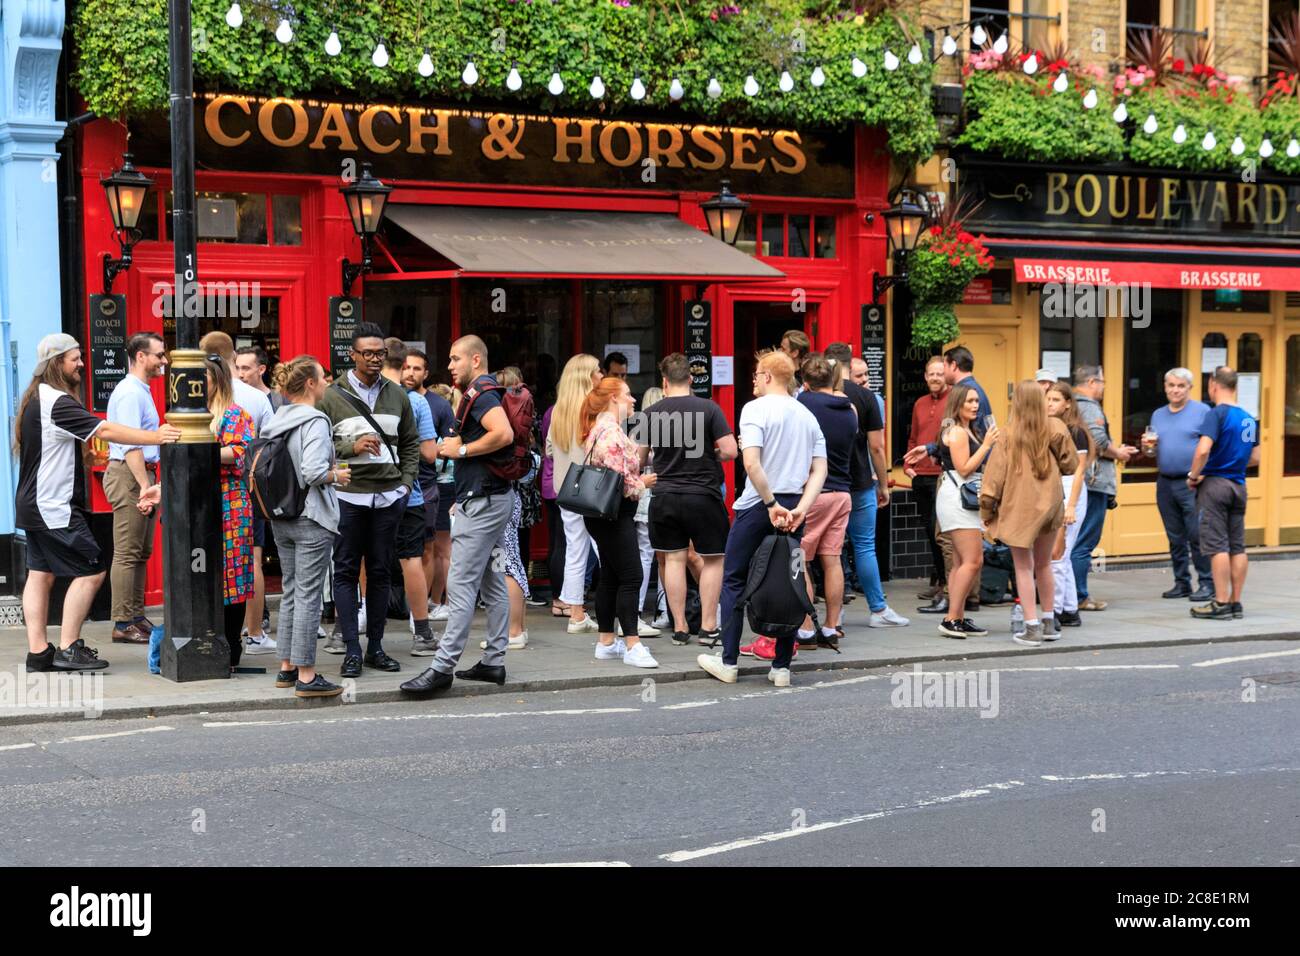 London, UK. 23rd July, 2020. A fairly large number of people drink and chat outside a pub in London's popular Covent Garden area, making social distancing effectively impossible. Credit: Imageplotter/Alamy Live News Stock Photo